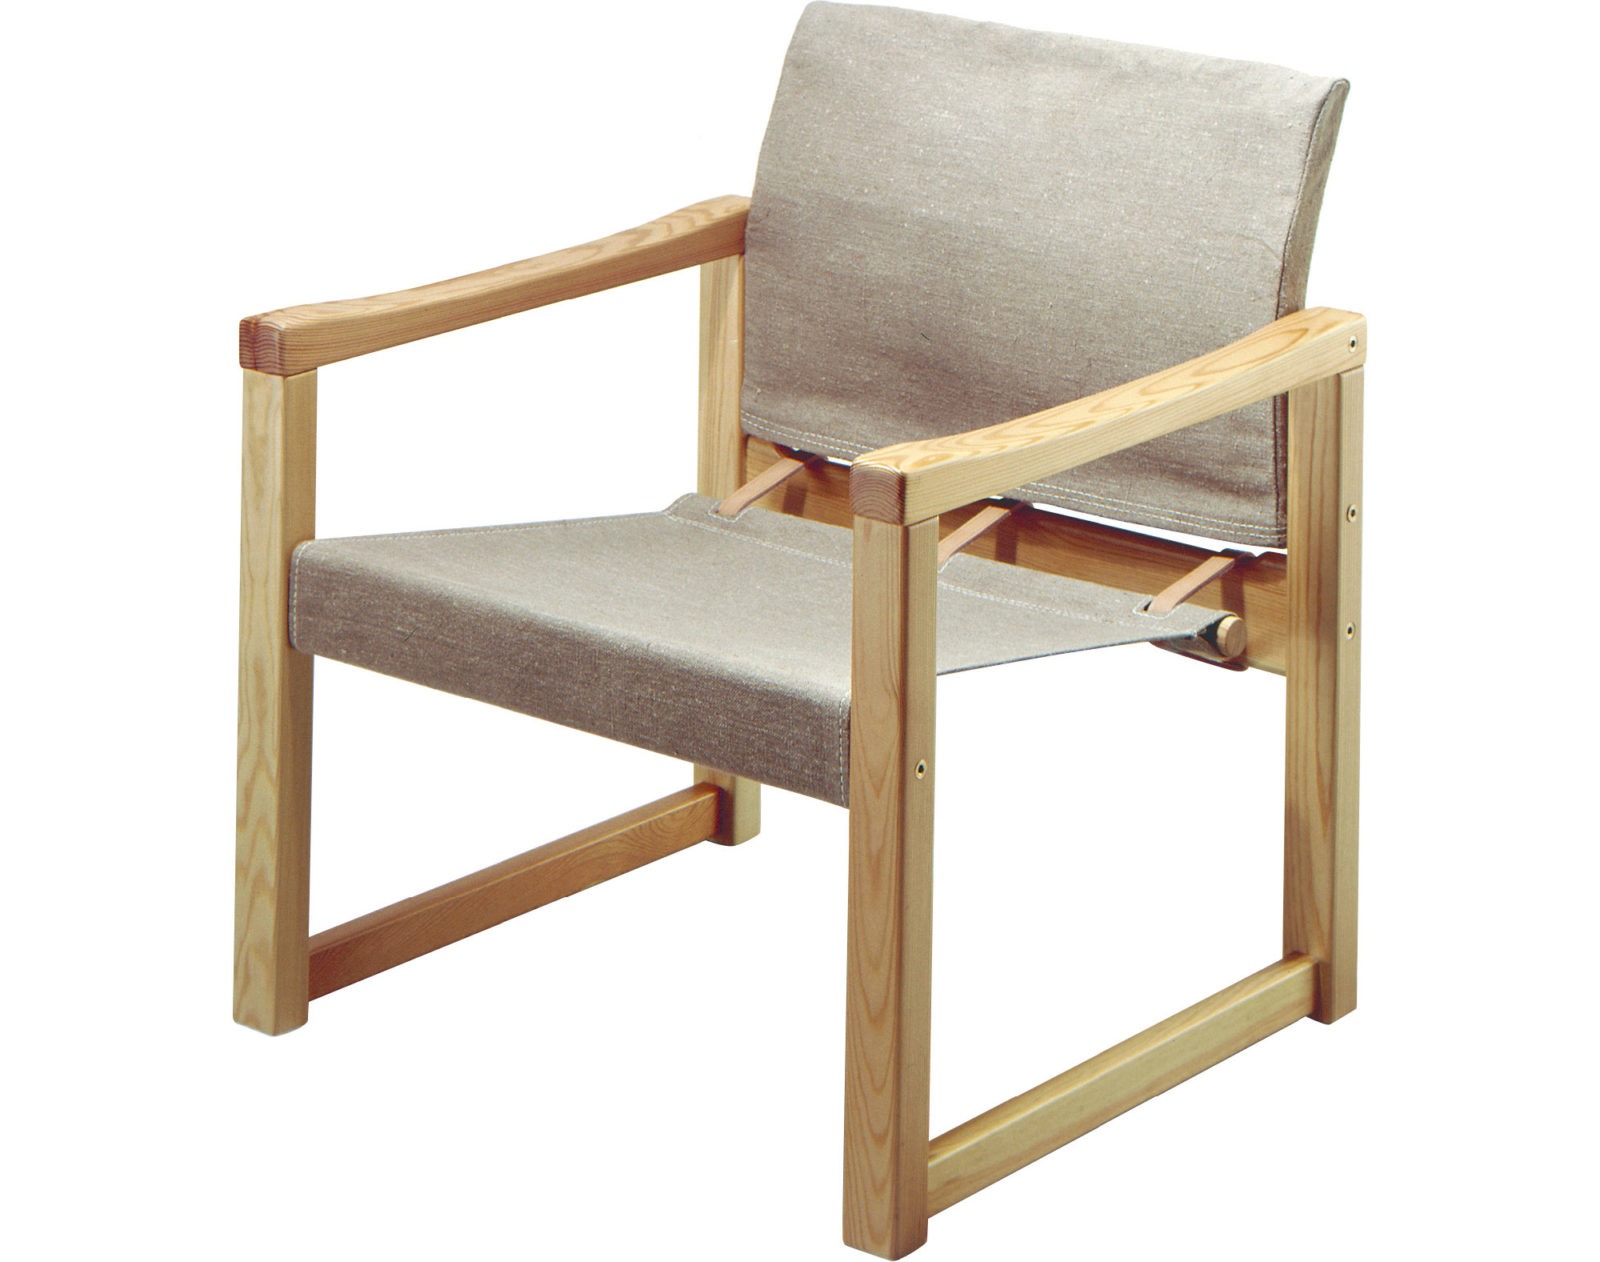 Armchair with pine frame, seat and back made of sand-coloured load-bearing fabric, DIANA.